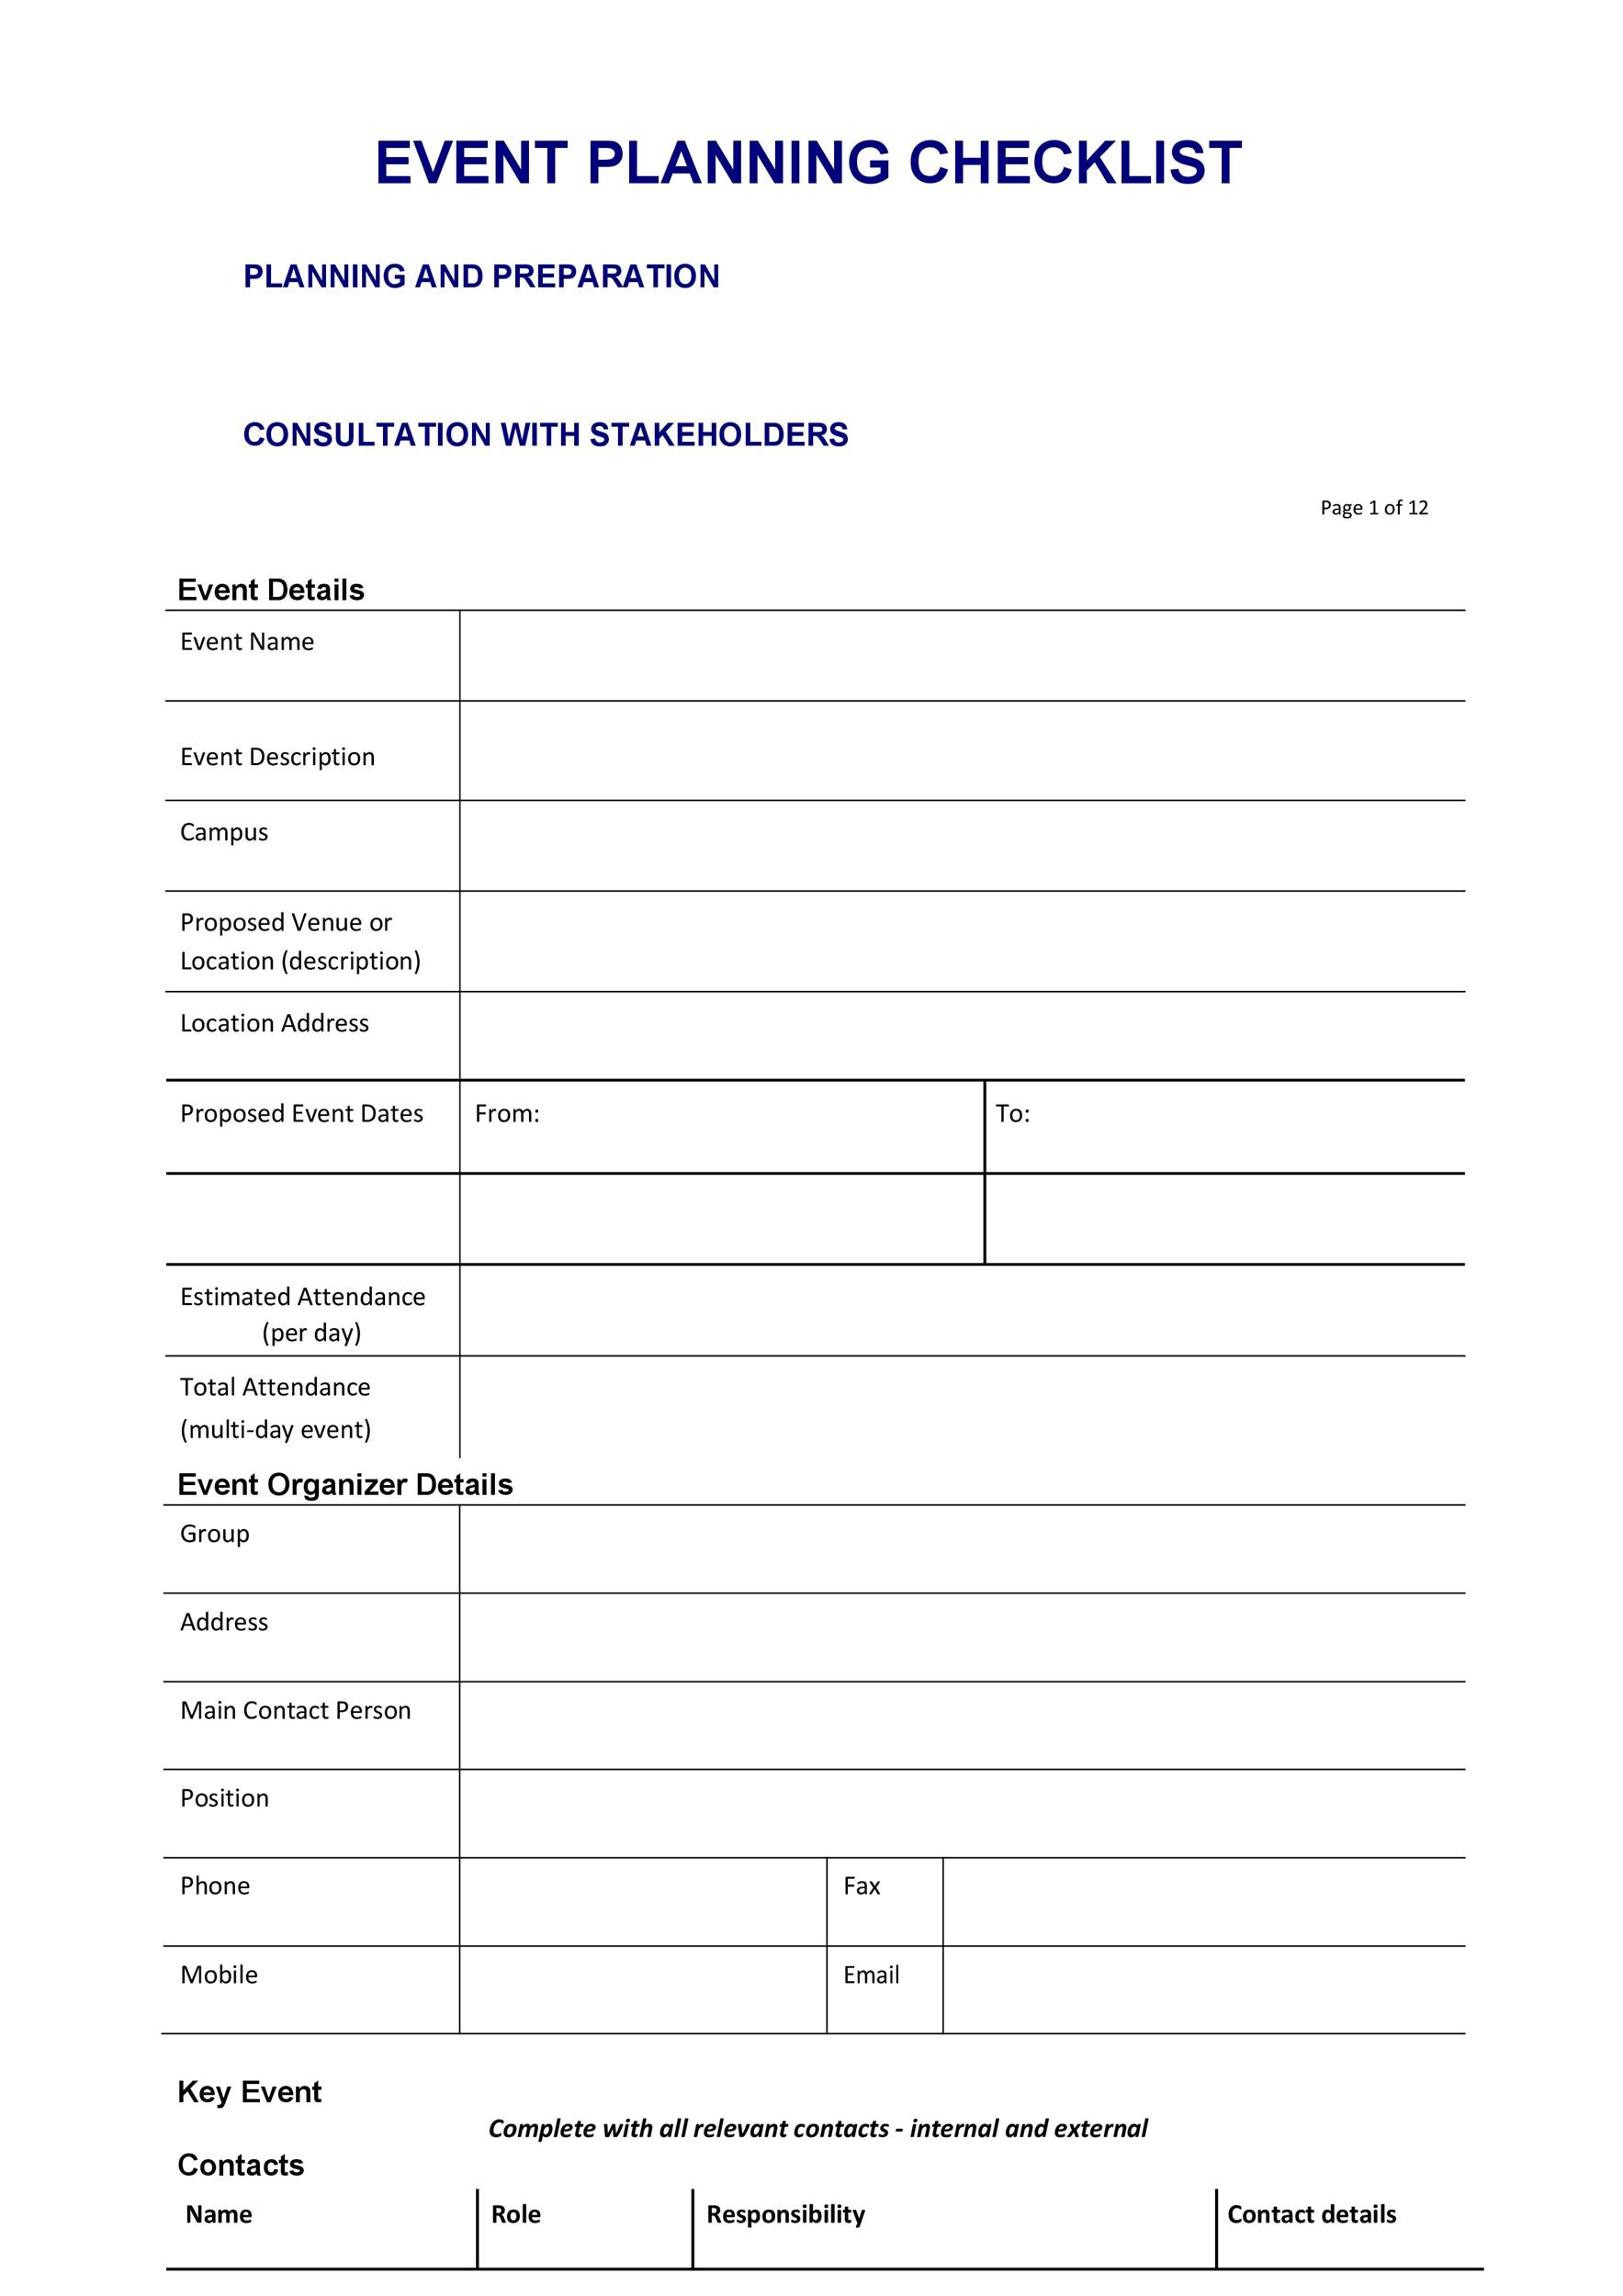 printable-event-planning-form-printable-forms-free-online